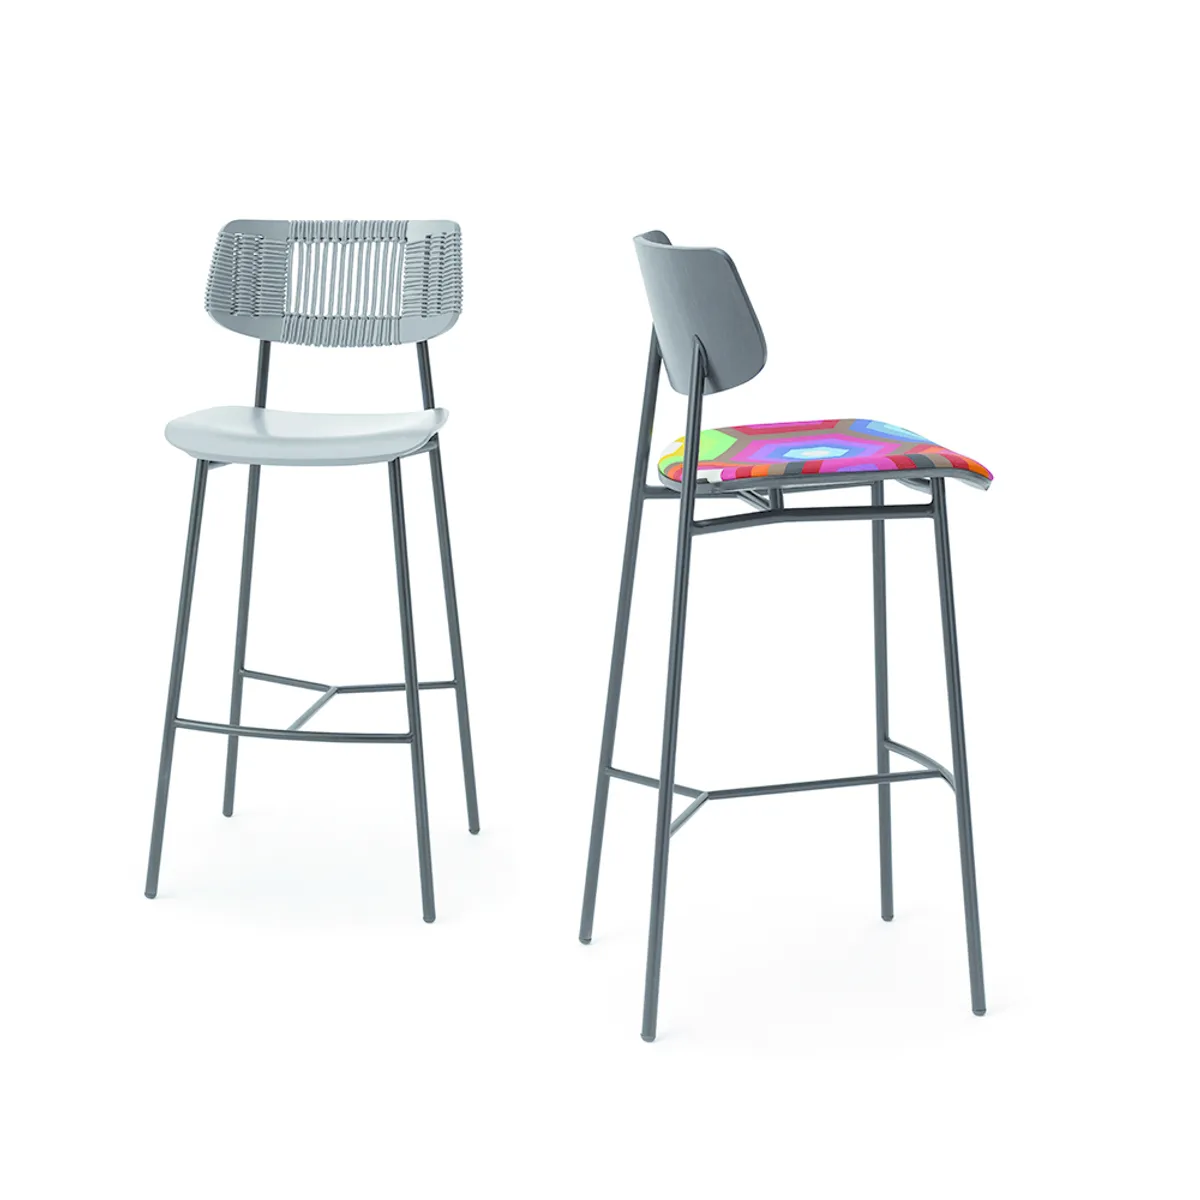 Meadow Bar Stool Cafe Furniture Inside Out Contracts 2